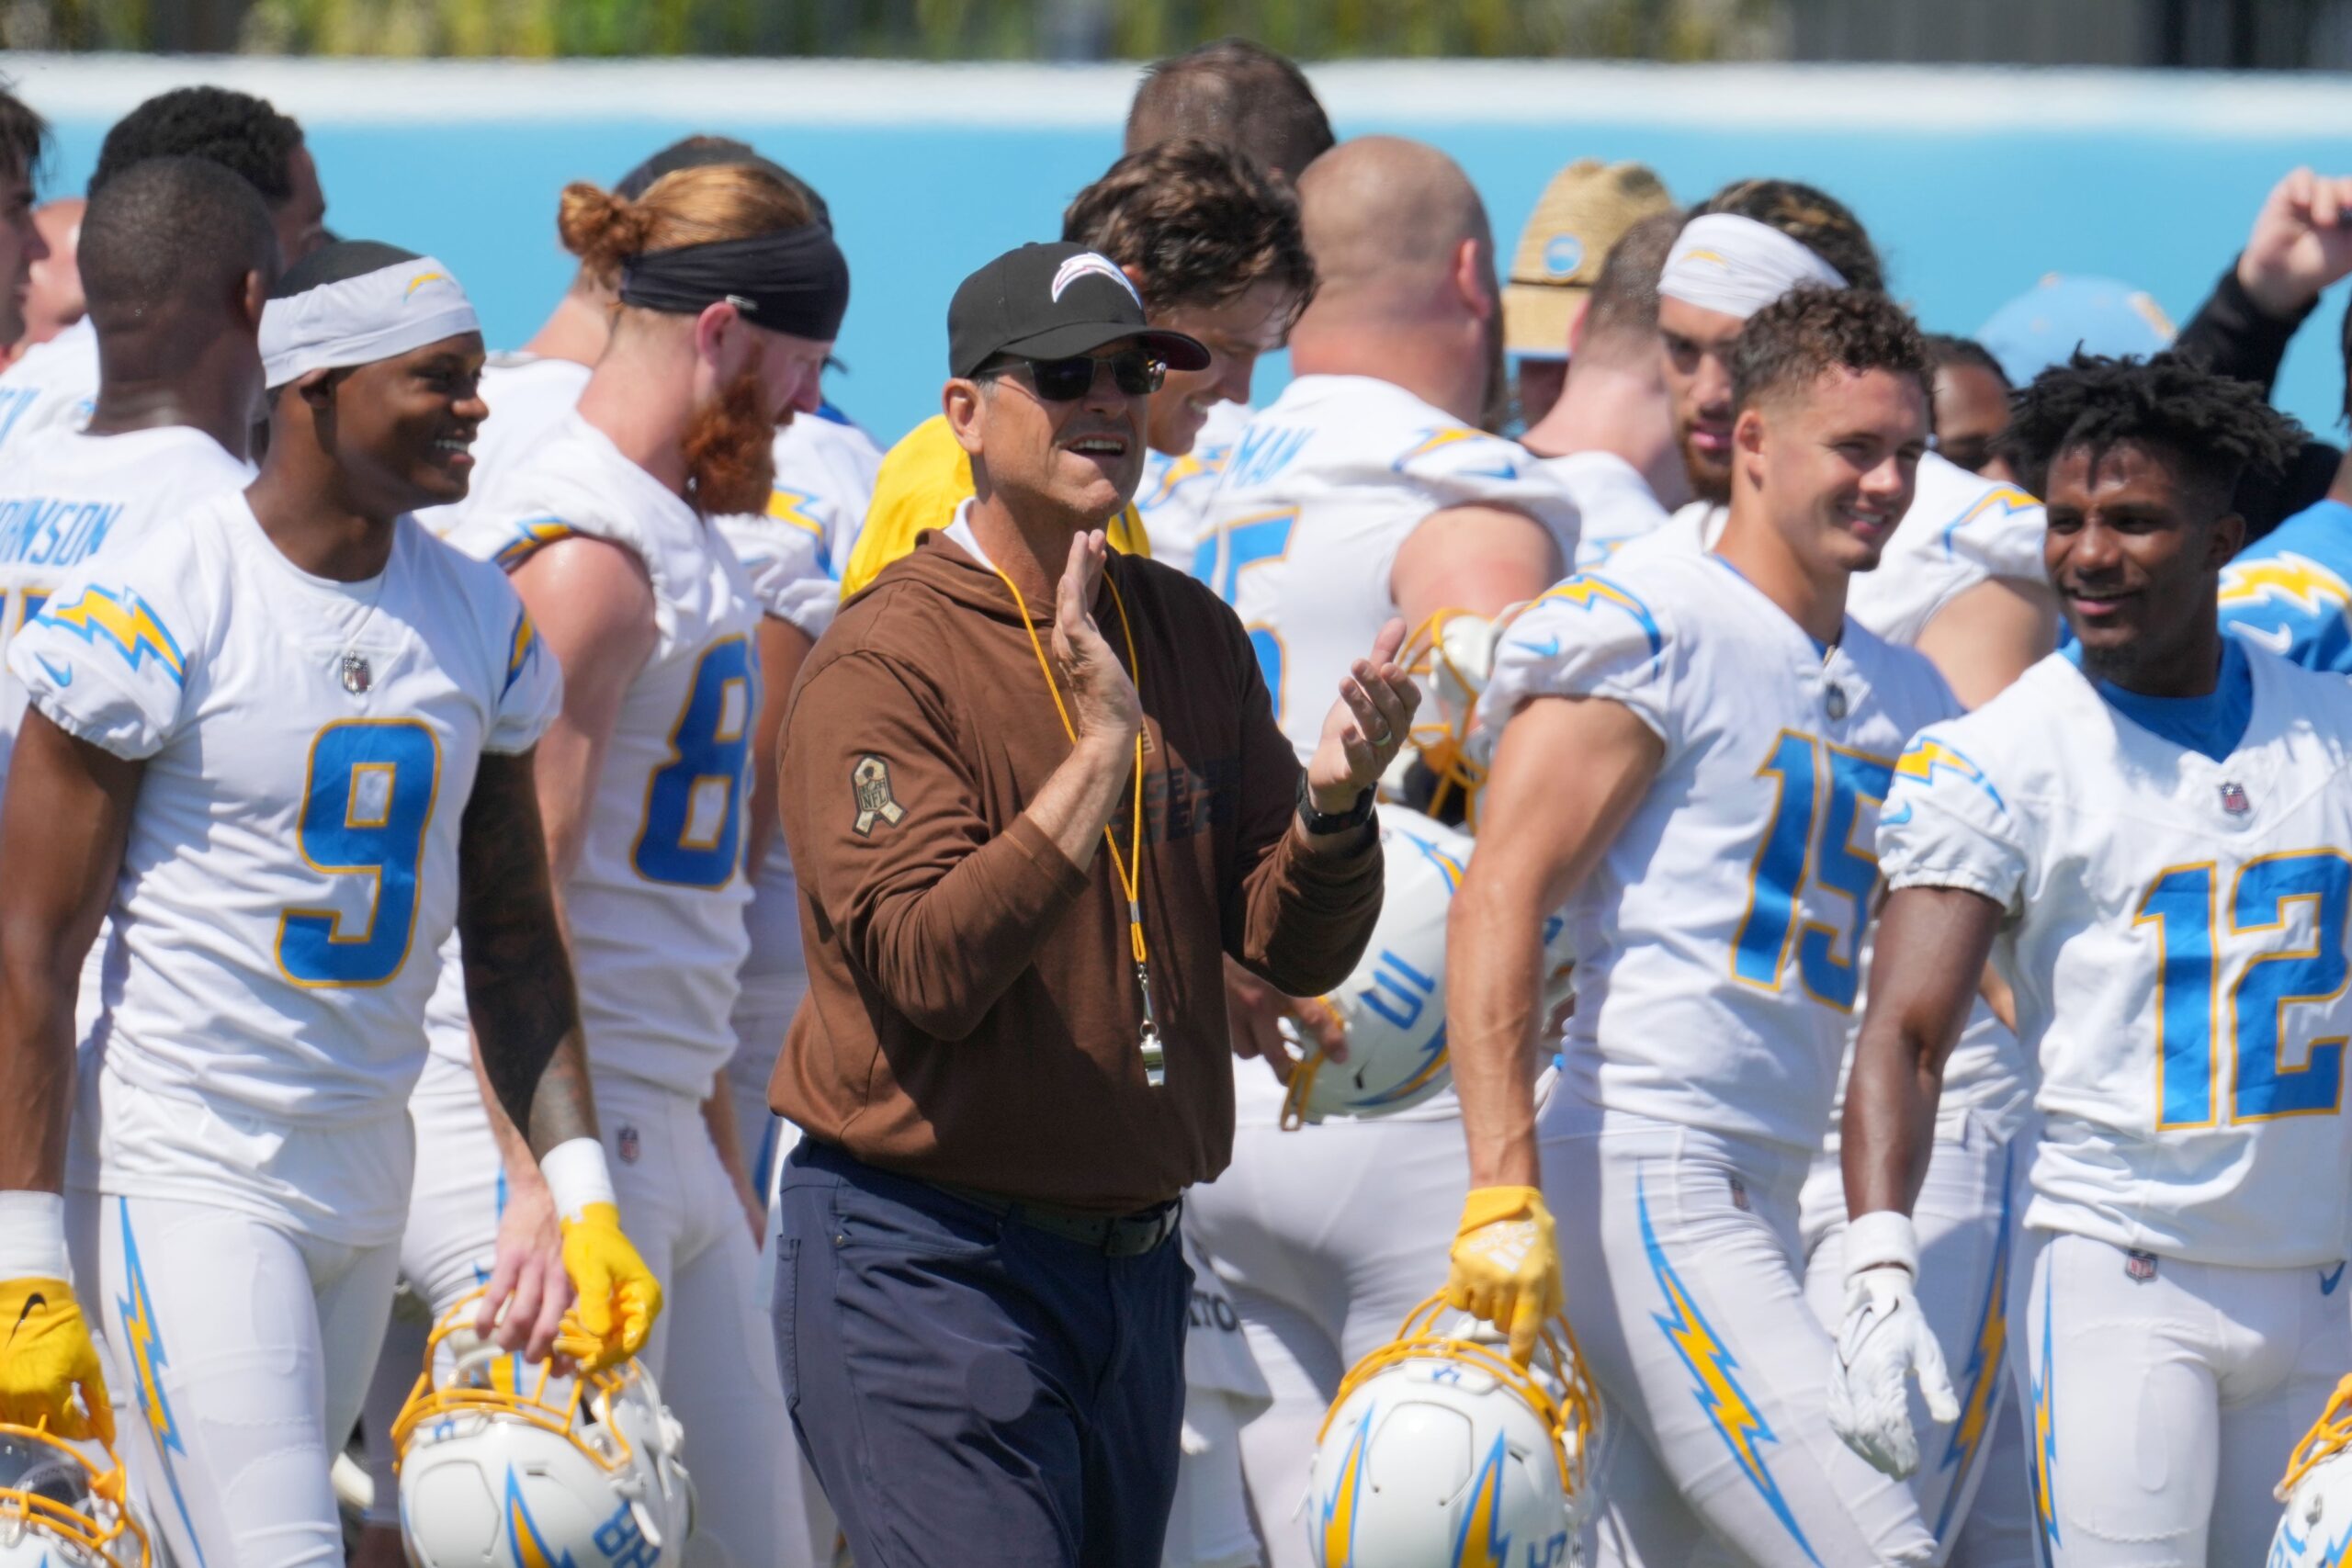 Los Angeles Chargers head coach Jim Harbaugh interacts with his team during minicamp at the Hoag Performance Center.